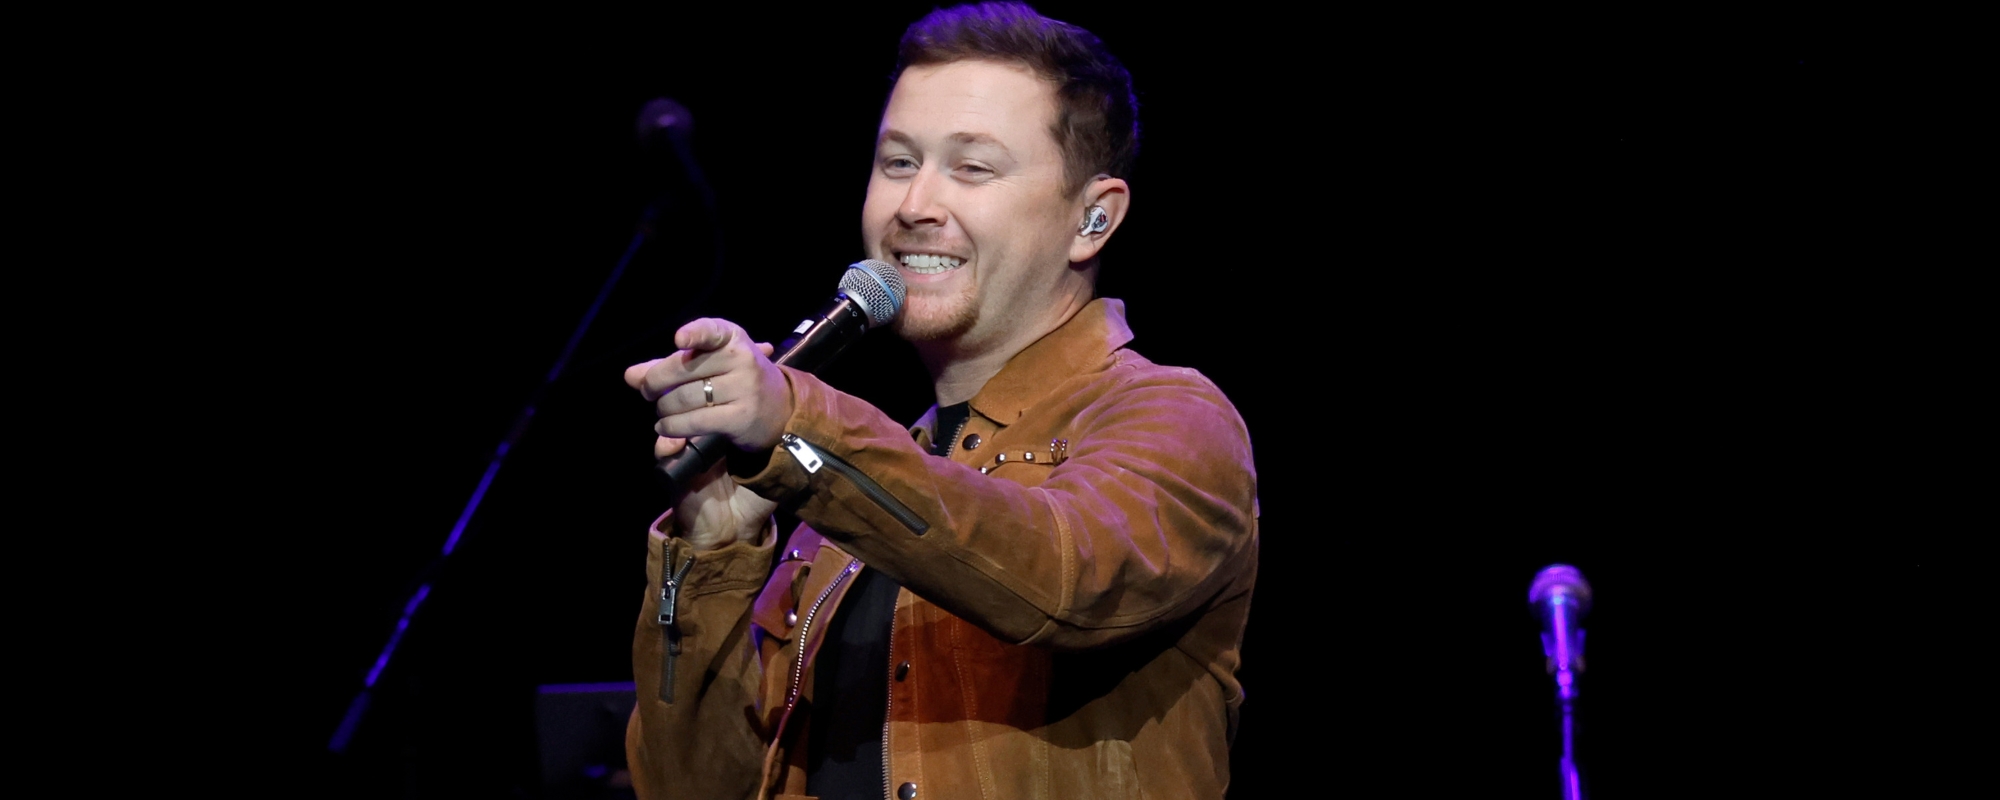 Former 'American Idol' Winner Scotty McCreery Lights Up the Stage in Return Performance